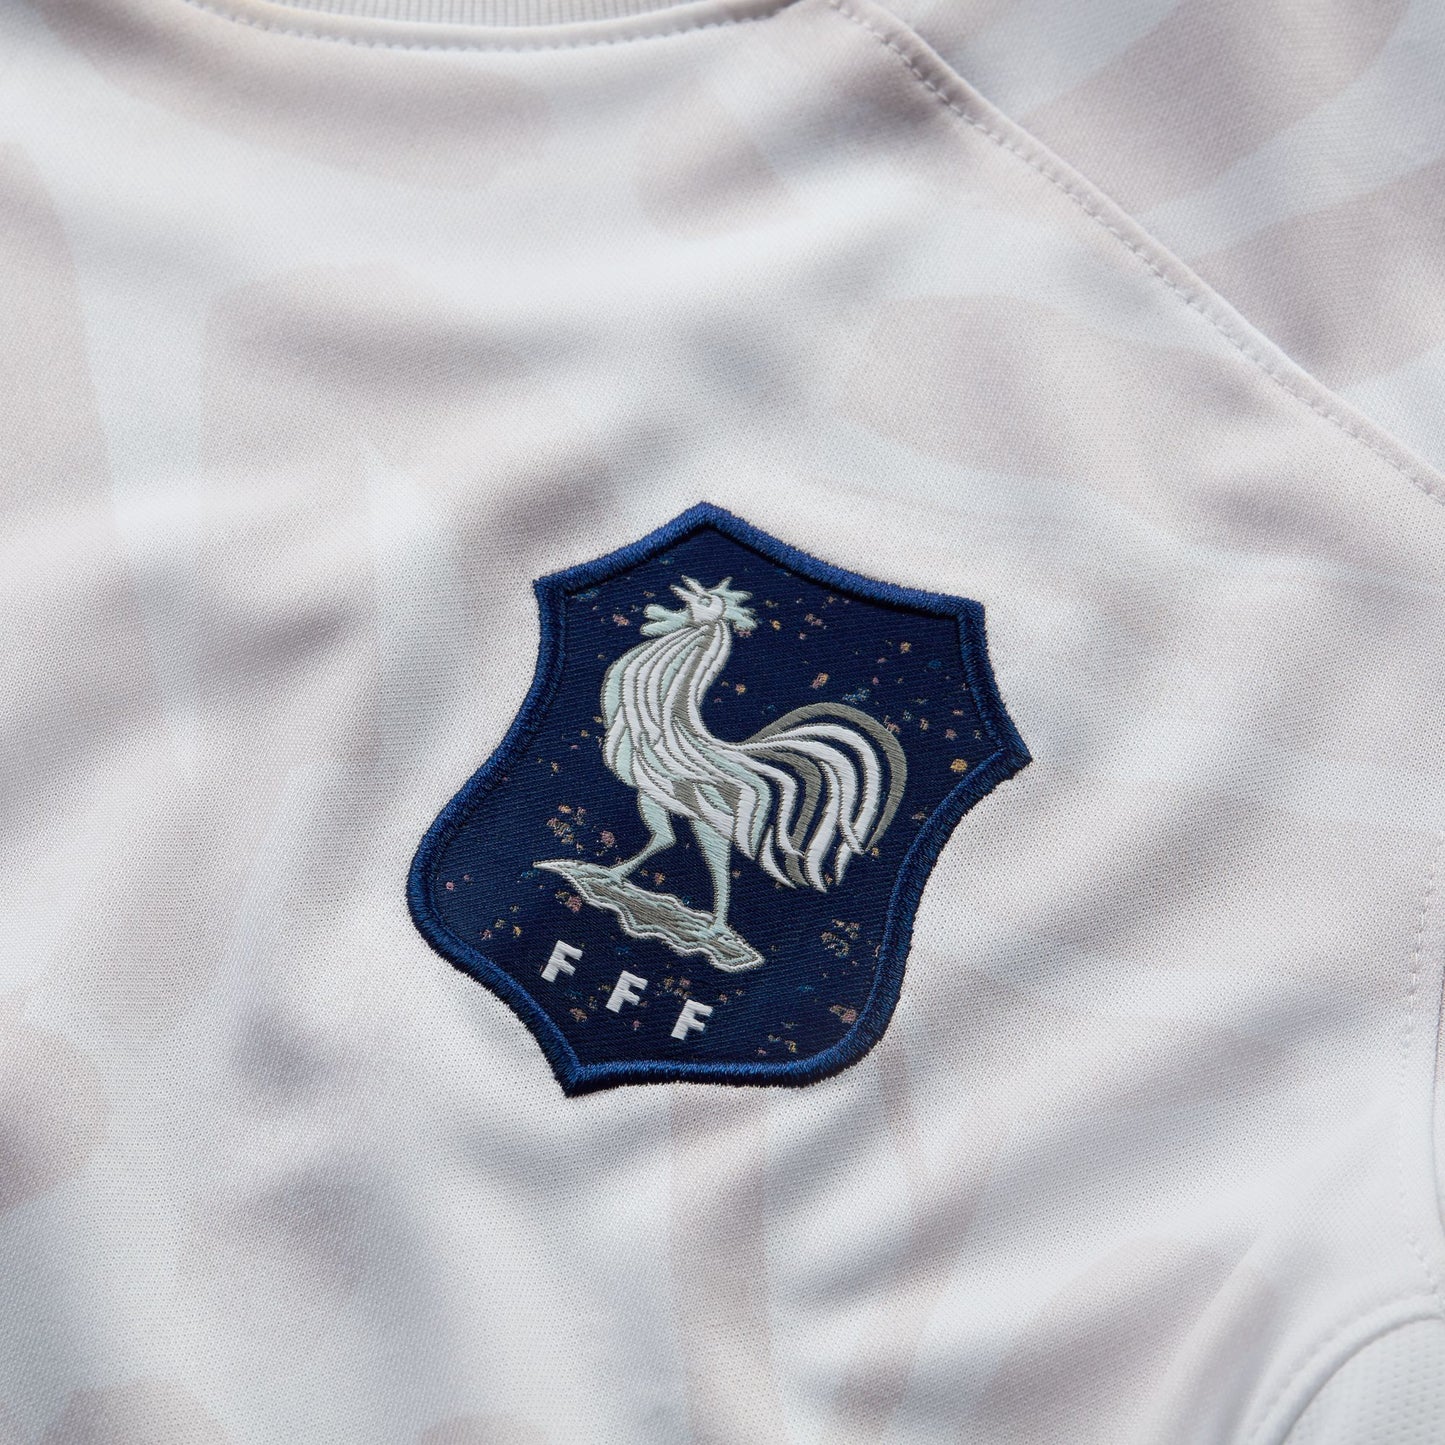 France Away Nike Stadium Curved Fit Jersey 2023